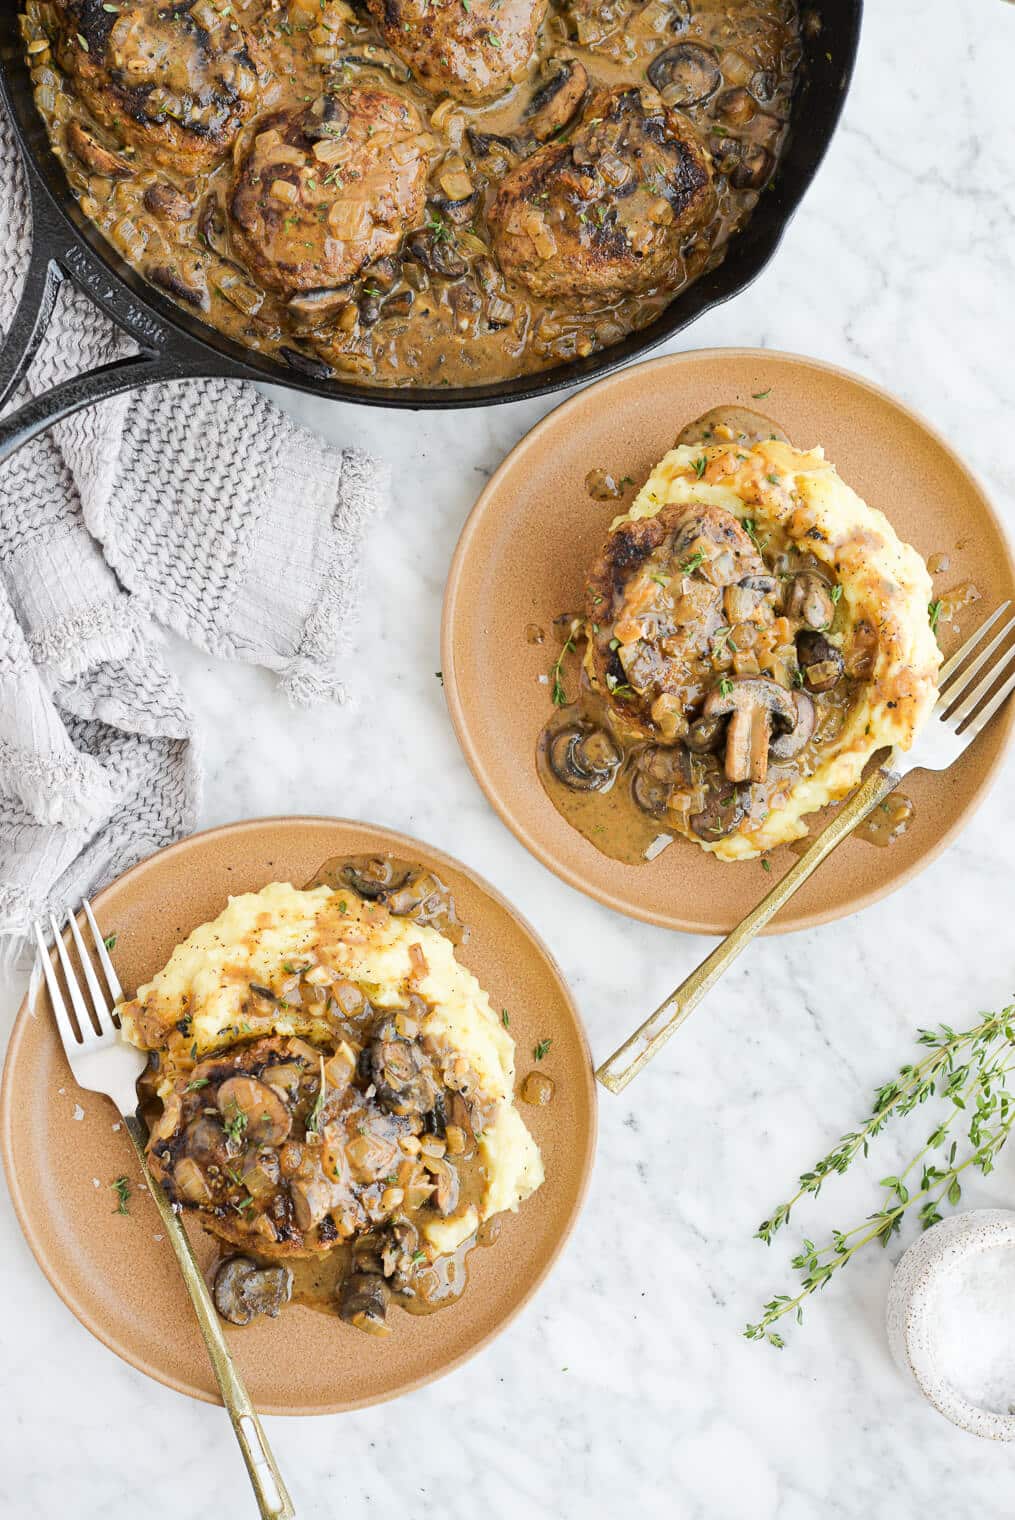 the top view of two plates of salisbury steak, mashed potatoes, and mushroom gravy sitting next to a skillet of salisbury steak on a marble surface